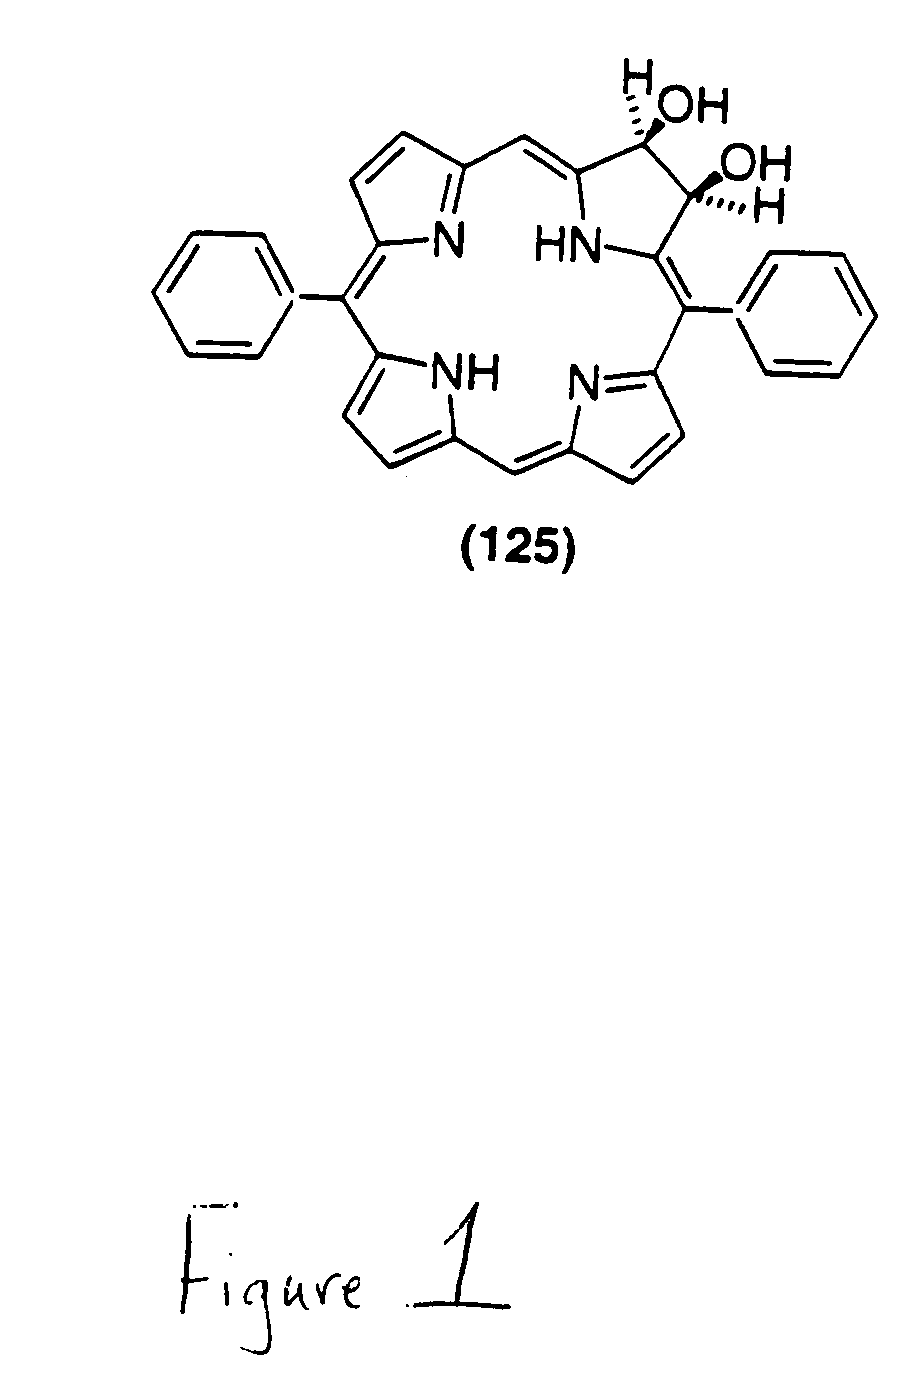 Beta,beta'-dihydroxy meso-substituted chlorins, isobacteriochlorins, and bacteriochlorins